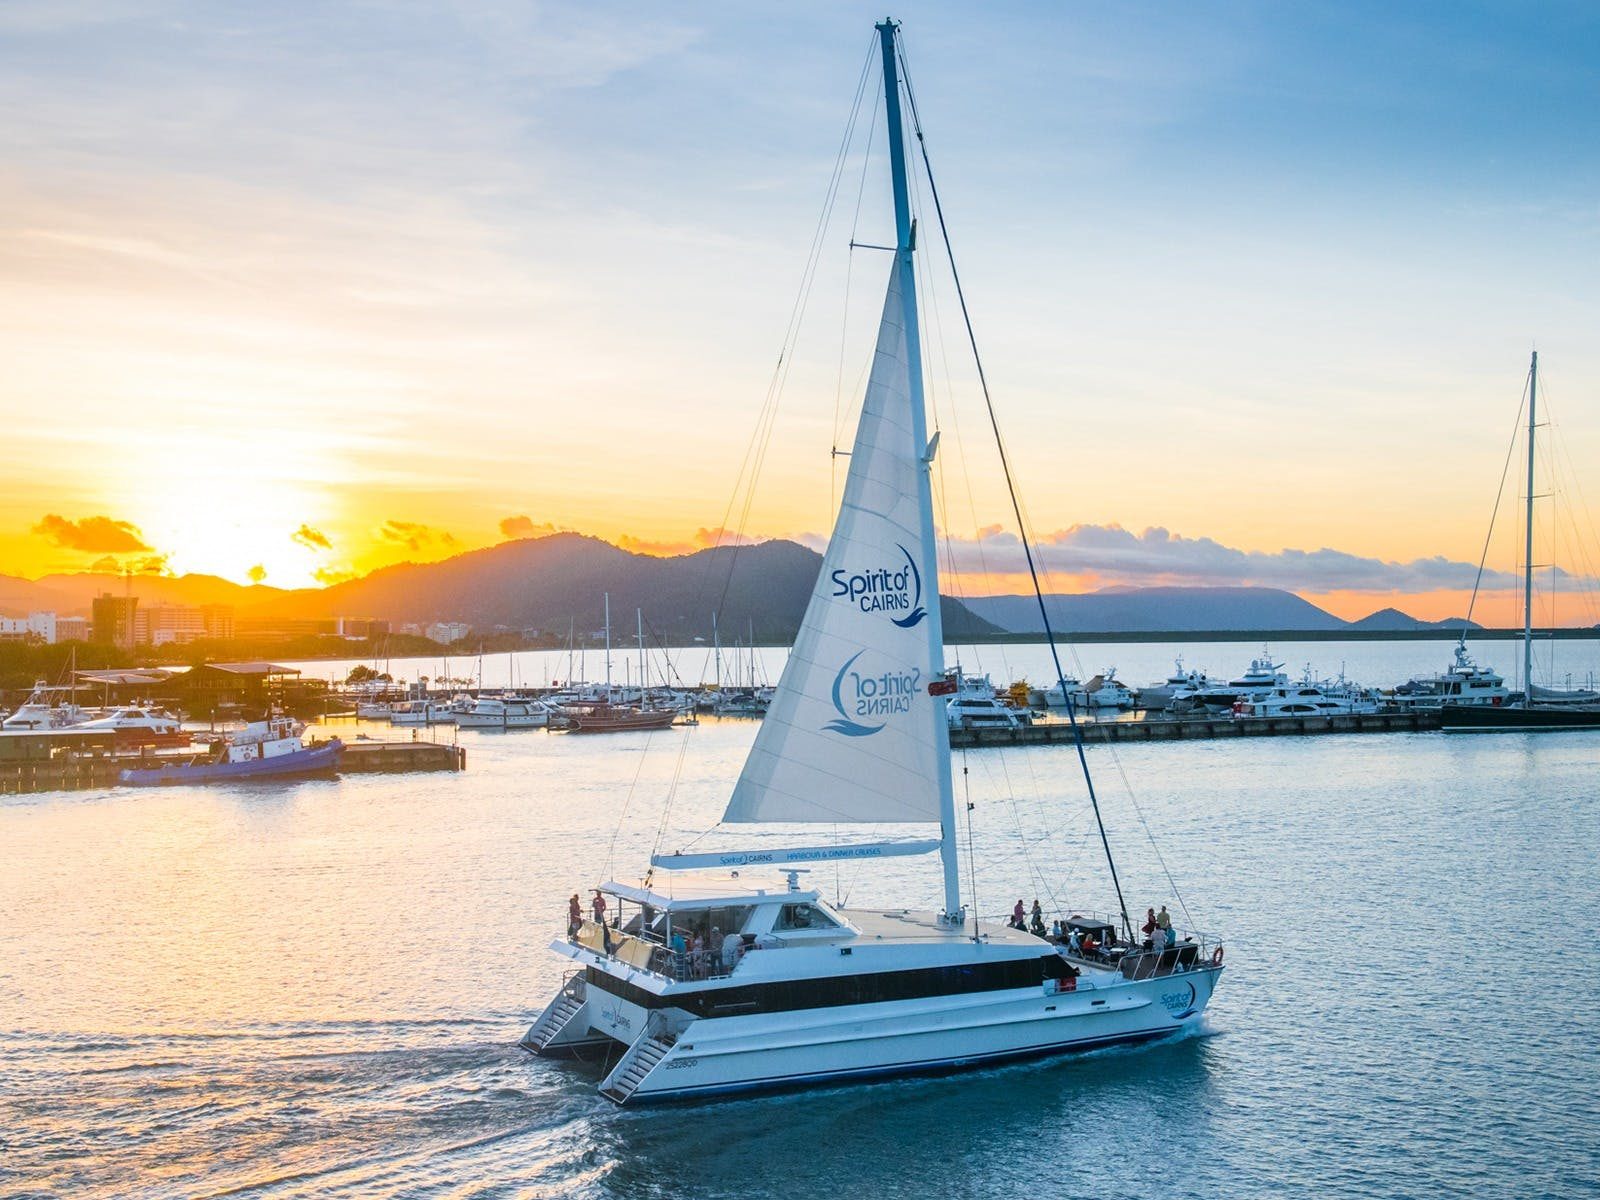 Spirit of Cairns catamaran sailing down Trinity inlet with sunset and mountains in the background